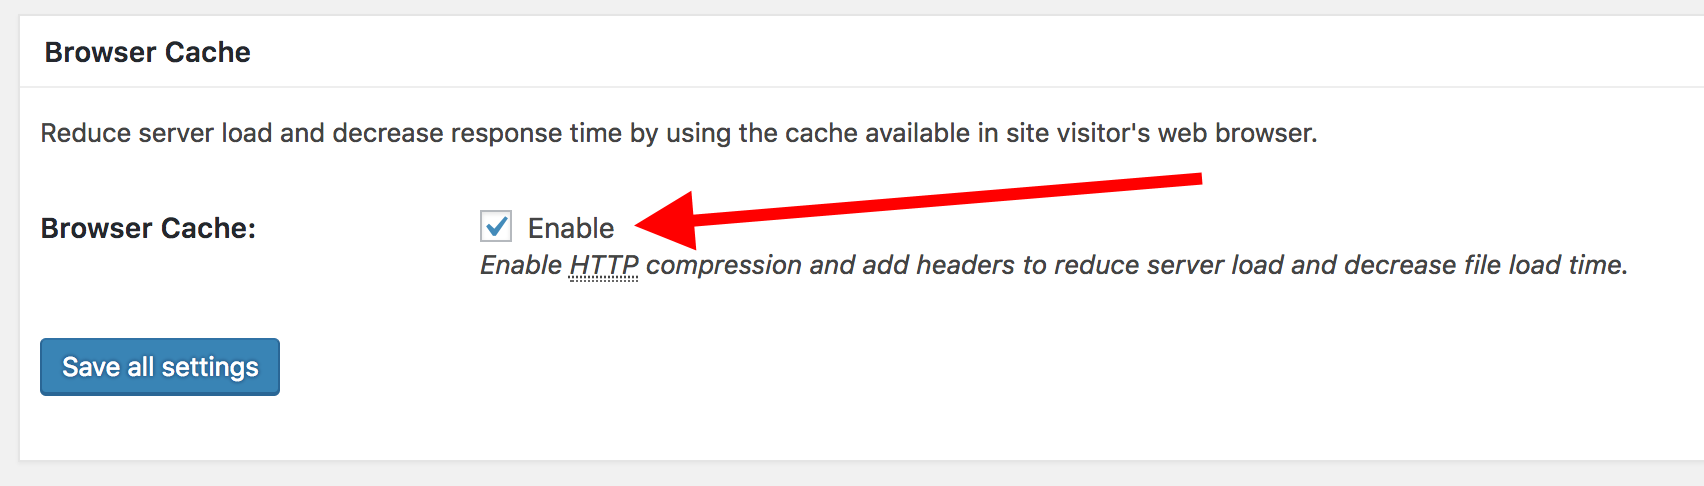 cache browser